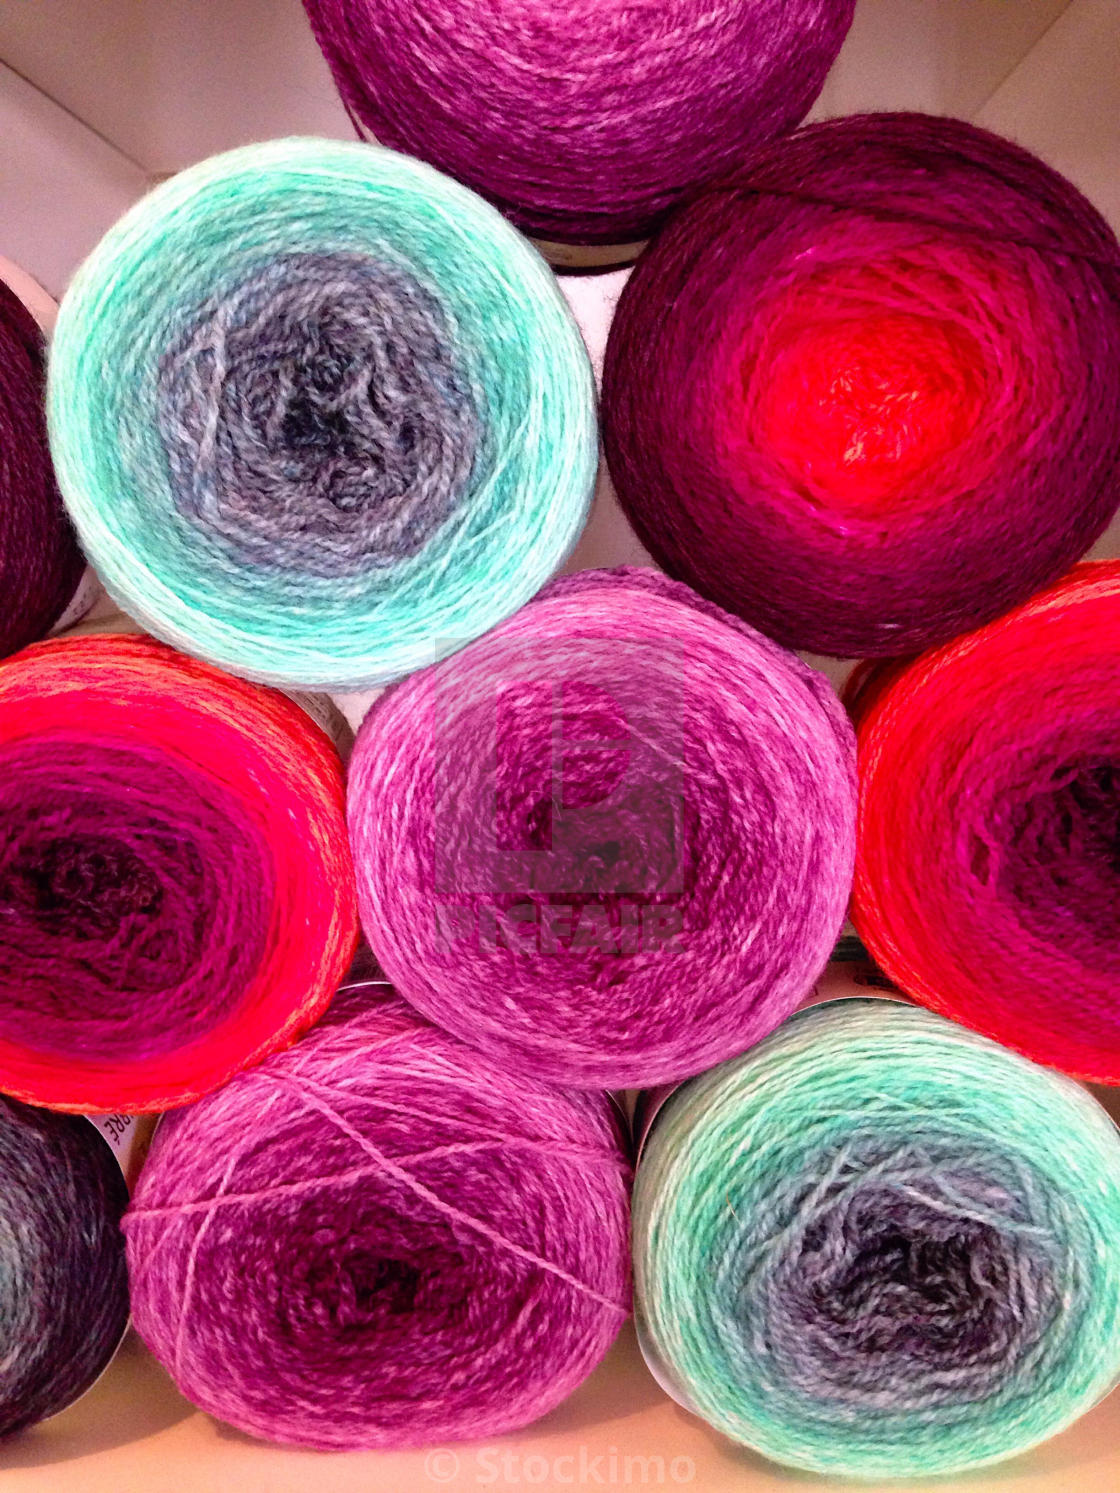 "Stack of colorful yarn" stock image